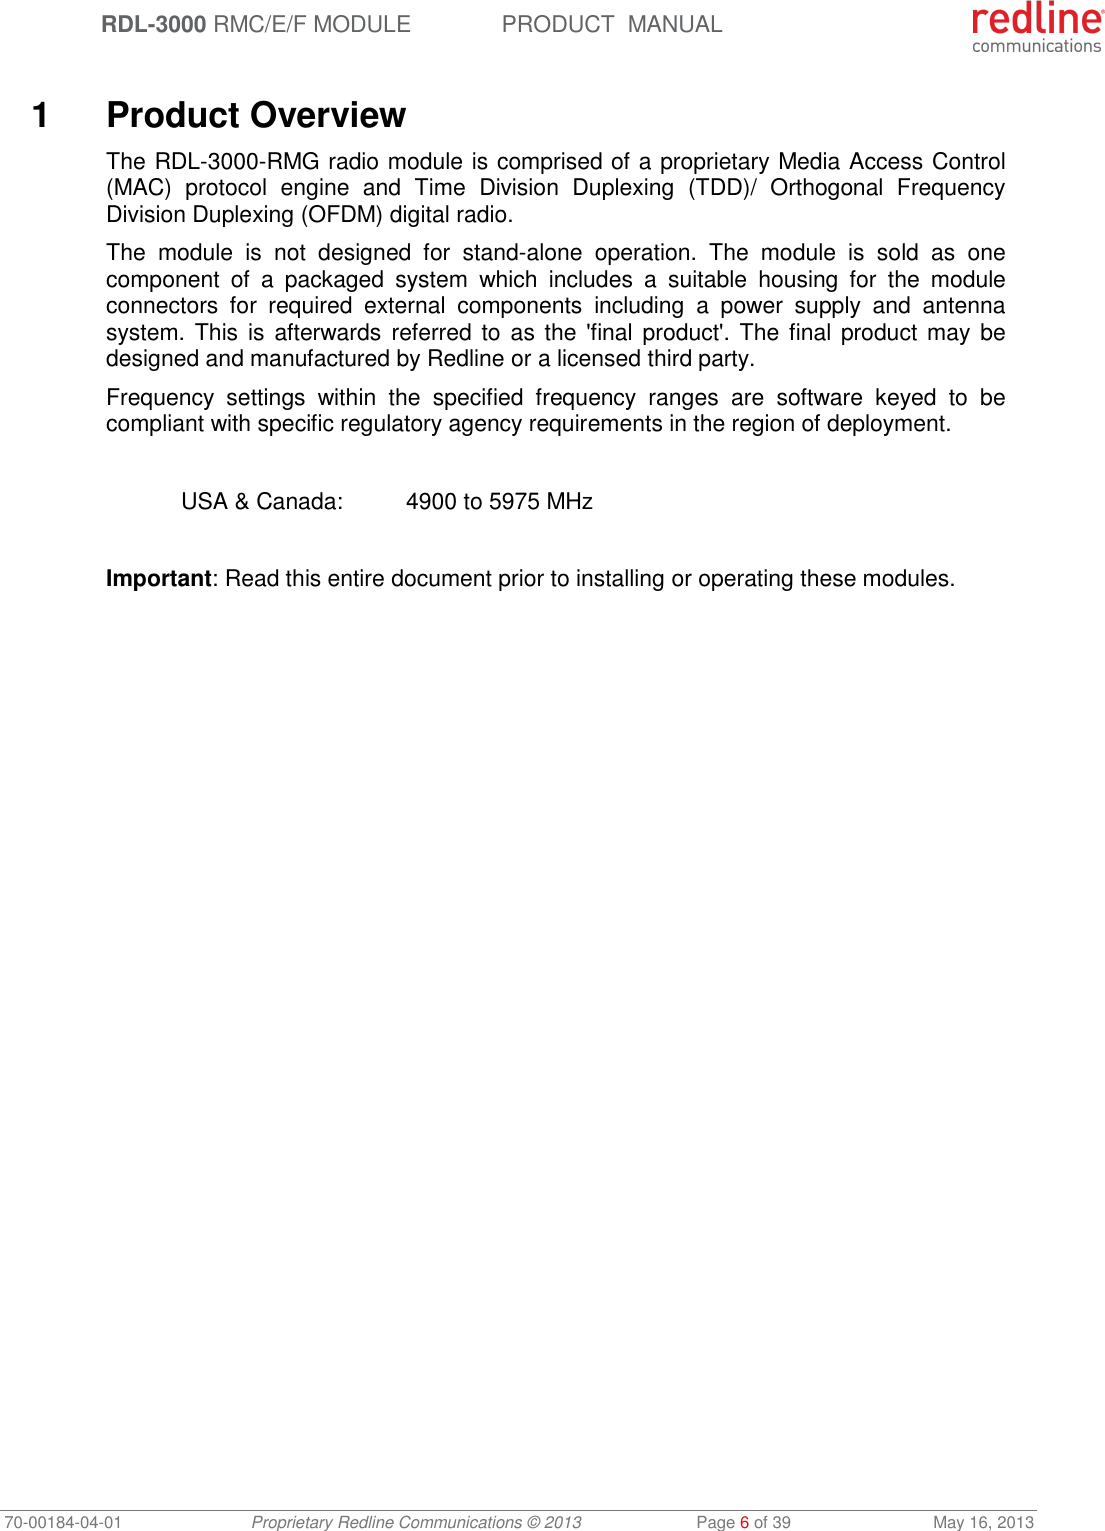  RDL-3000 RMC/E/F MODULE PRODUCT  MANUAL 70-00184-04-01 Proprietary Redline Communications © 2013  Page 6 of 39  May 16, 2013   1  Product Overview The RDL-3000-RMG radio module is comprised of a proprietary Media Access Control (MAC)  protocol  engine  and  Time  Division  Duplexing  (TDD)/  Orthogonal  Frequency Division Duplexing (OFDM) digital radio. The  module  is  not  designed  for  stand-alone  operation.  The  module  is  sold  as  one component  of  a  packaged  system  which  includes  a  suitable  housing  for  the  module connectors  for  required  external  components  including  a  power  supply  and  antenna system. This is  afterwards referred to  as  the &apos;final  product&apos;. The  final product may  be designed and manufactured by Redline or a licensed third party. Frequency  settings  within  the  specified  frequency  ranges  are  software  keyed  to  be compliant with specific regulatory agency requirements in the region of deployment.    USA &amp; Canada:  4900 to 5975 MHz  Important: Read this entire document prior to installing or operating these modules.  